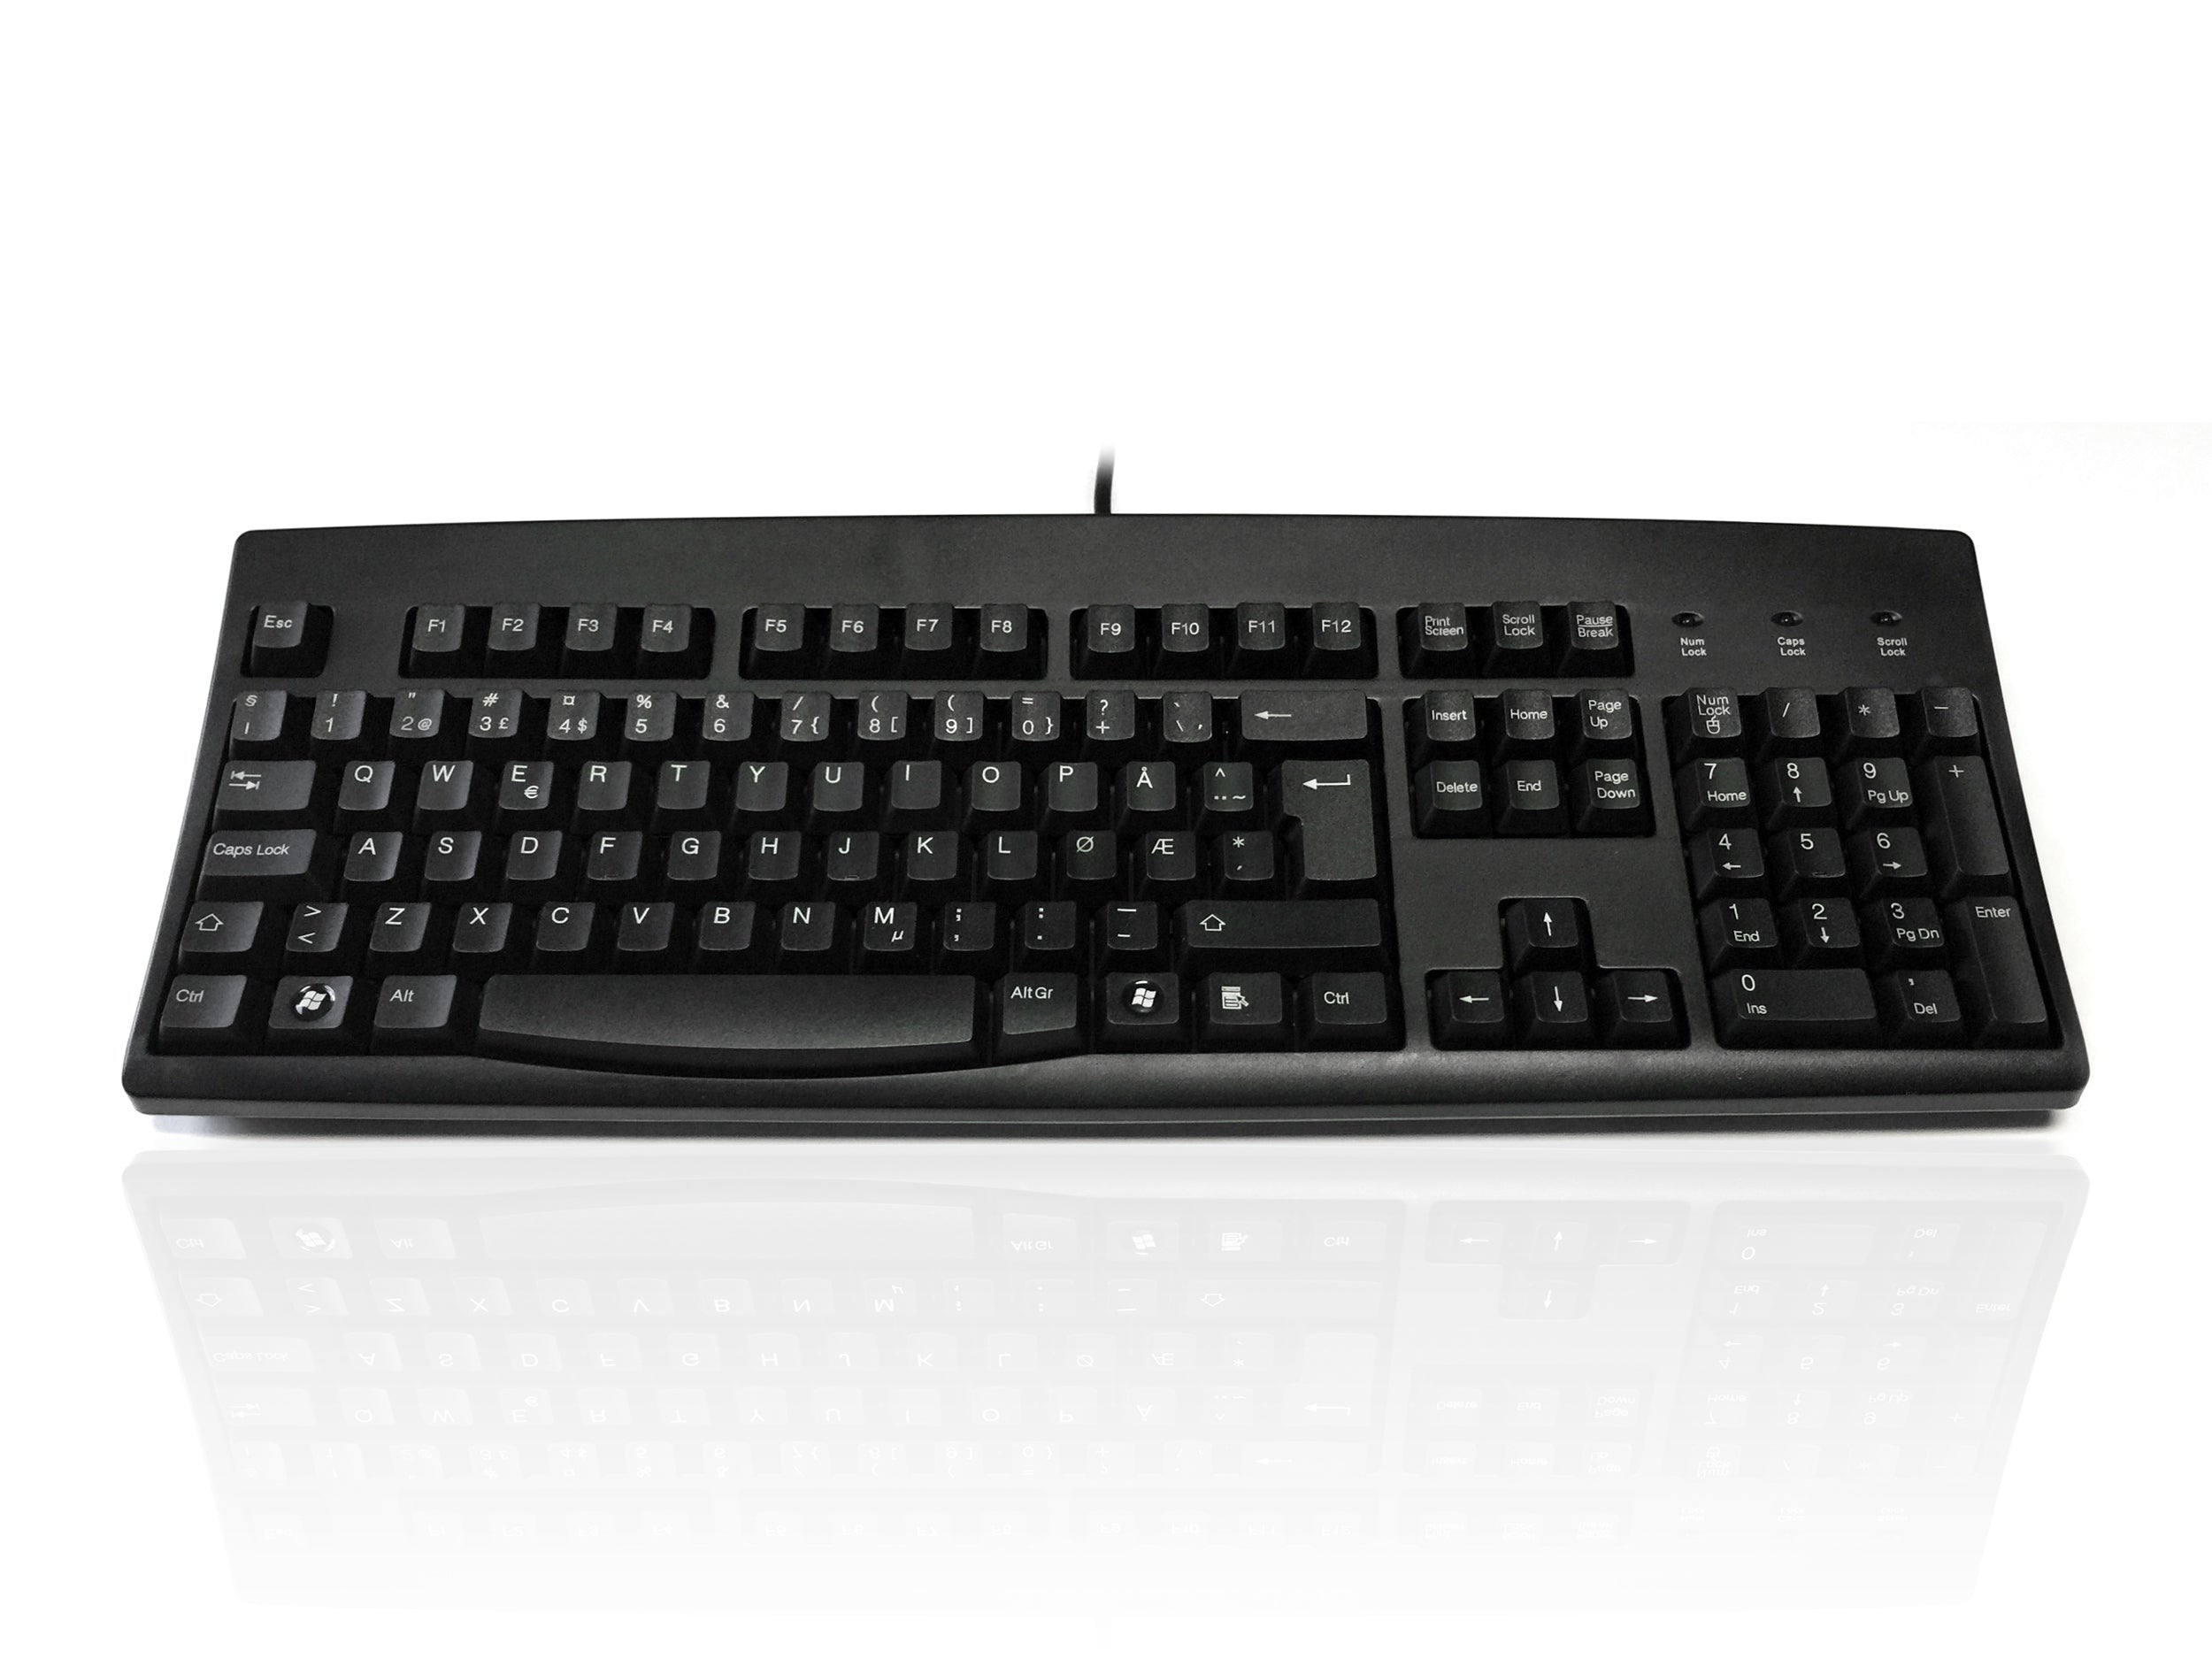 Accuratus 260 - PS/2 Full Size Professional Keyboard with Contoured Full Height Touch Typing Keys & Patented One Touch Euro Key